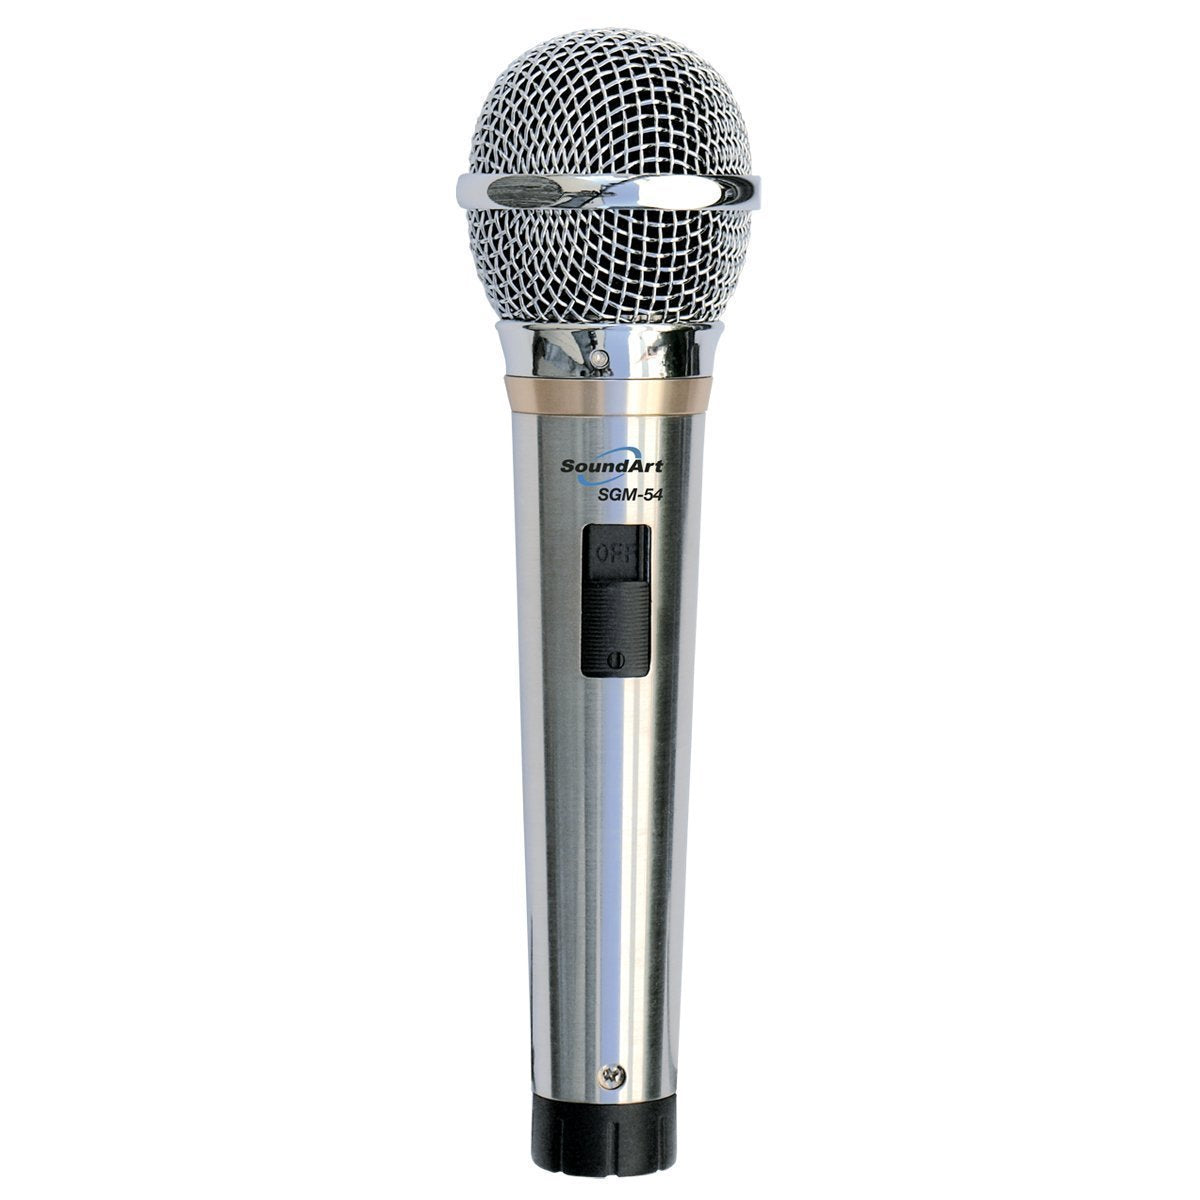 SoundArt  SGM-54 Hand-Held Dynamic Microphone with Protective Bag